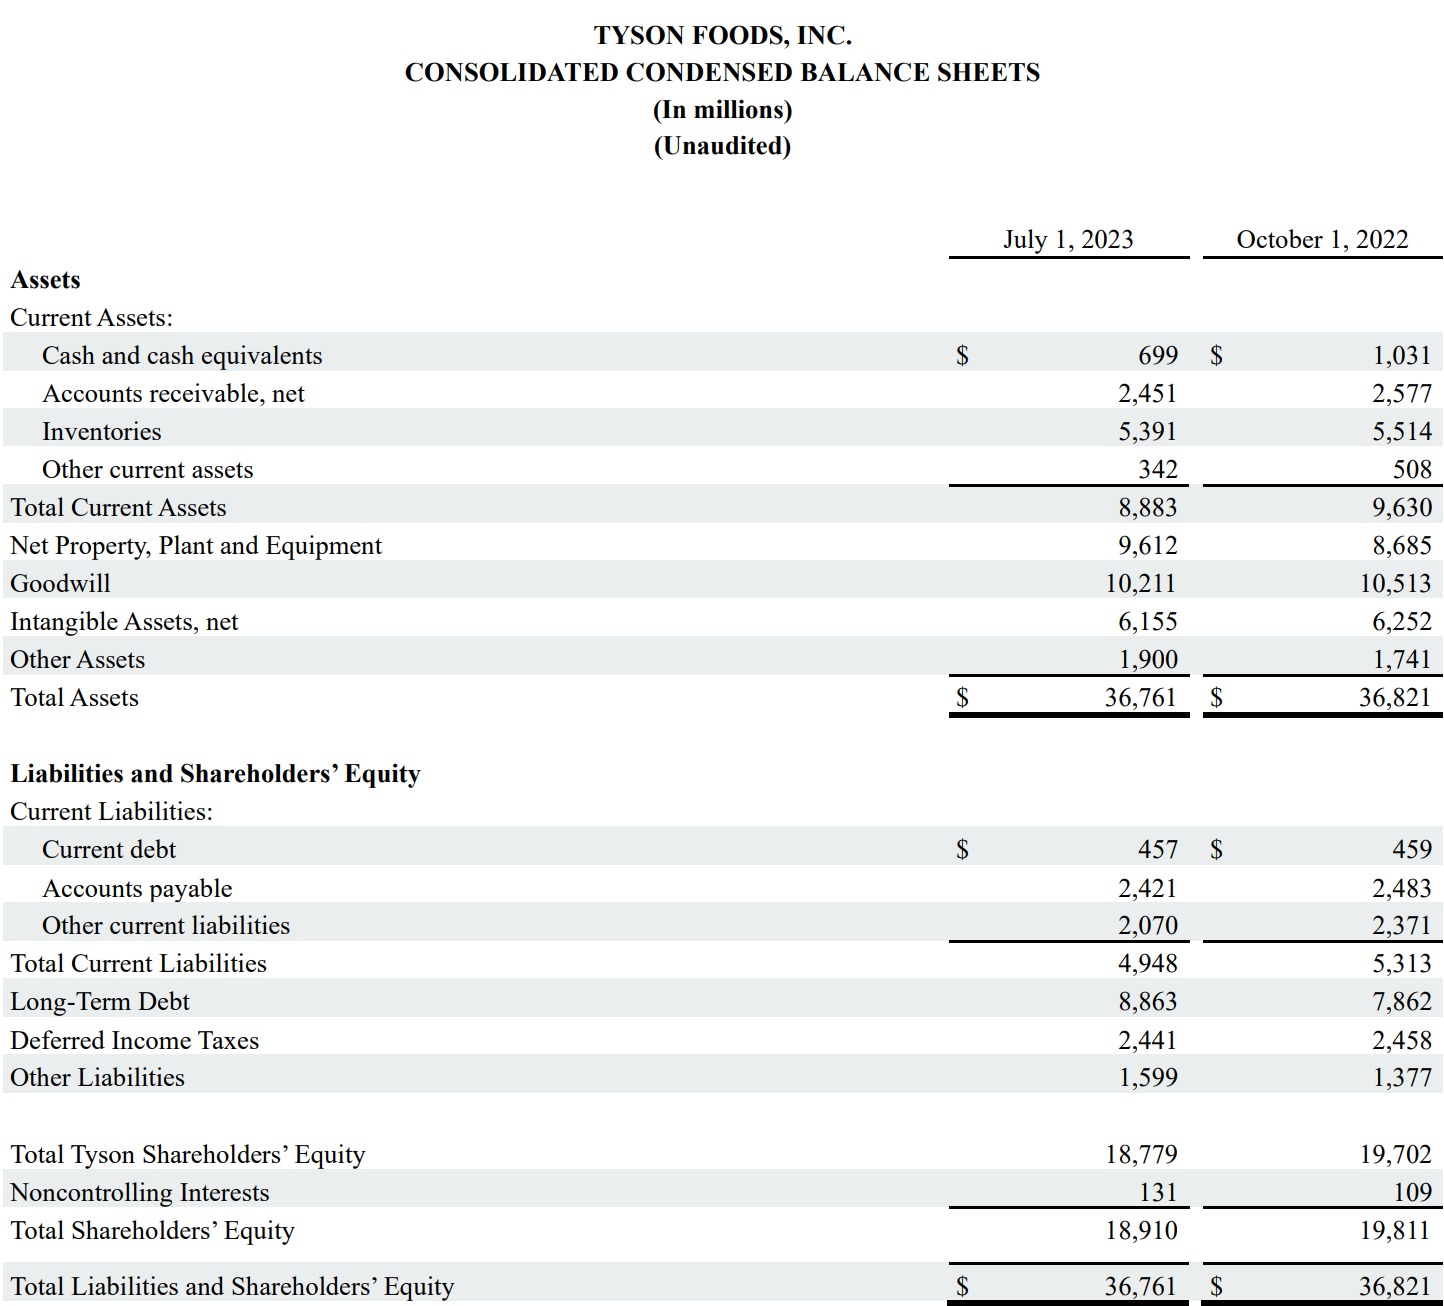 Image of table showing consolidated condensed balance sheets